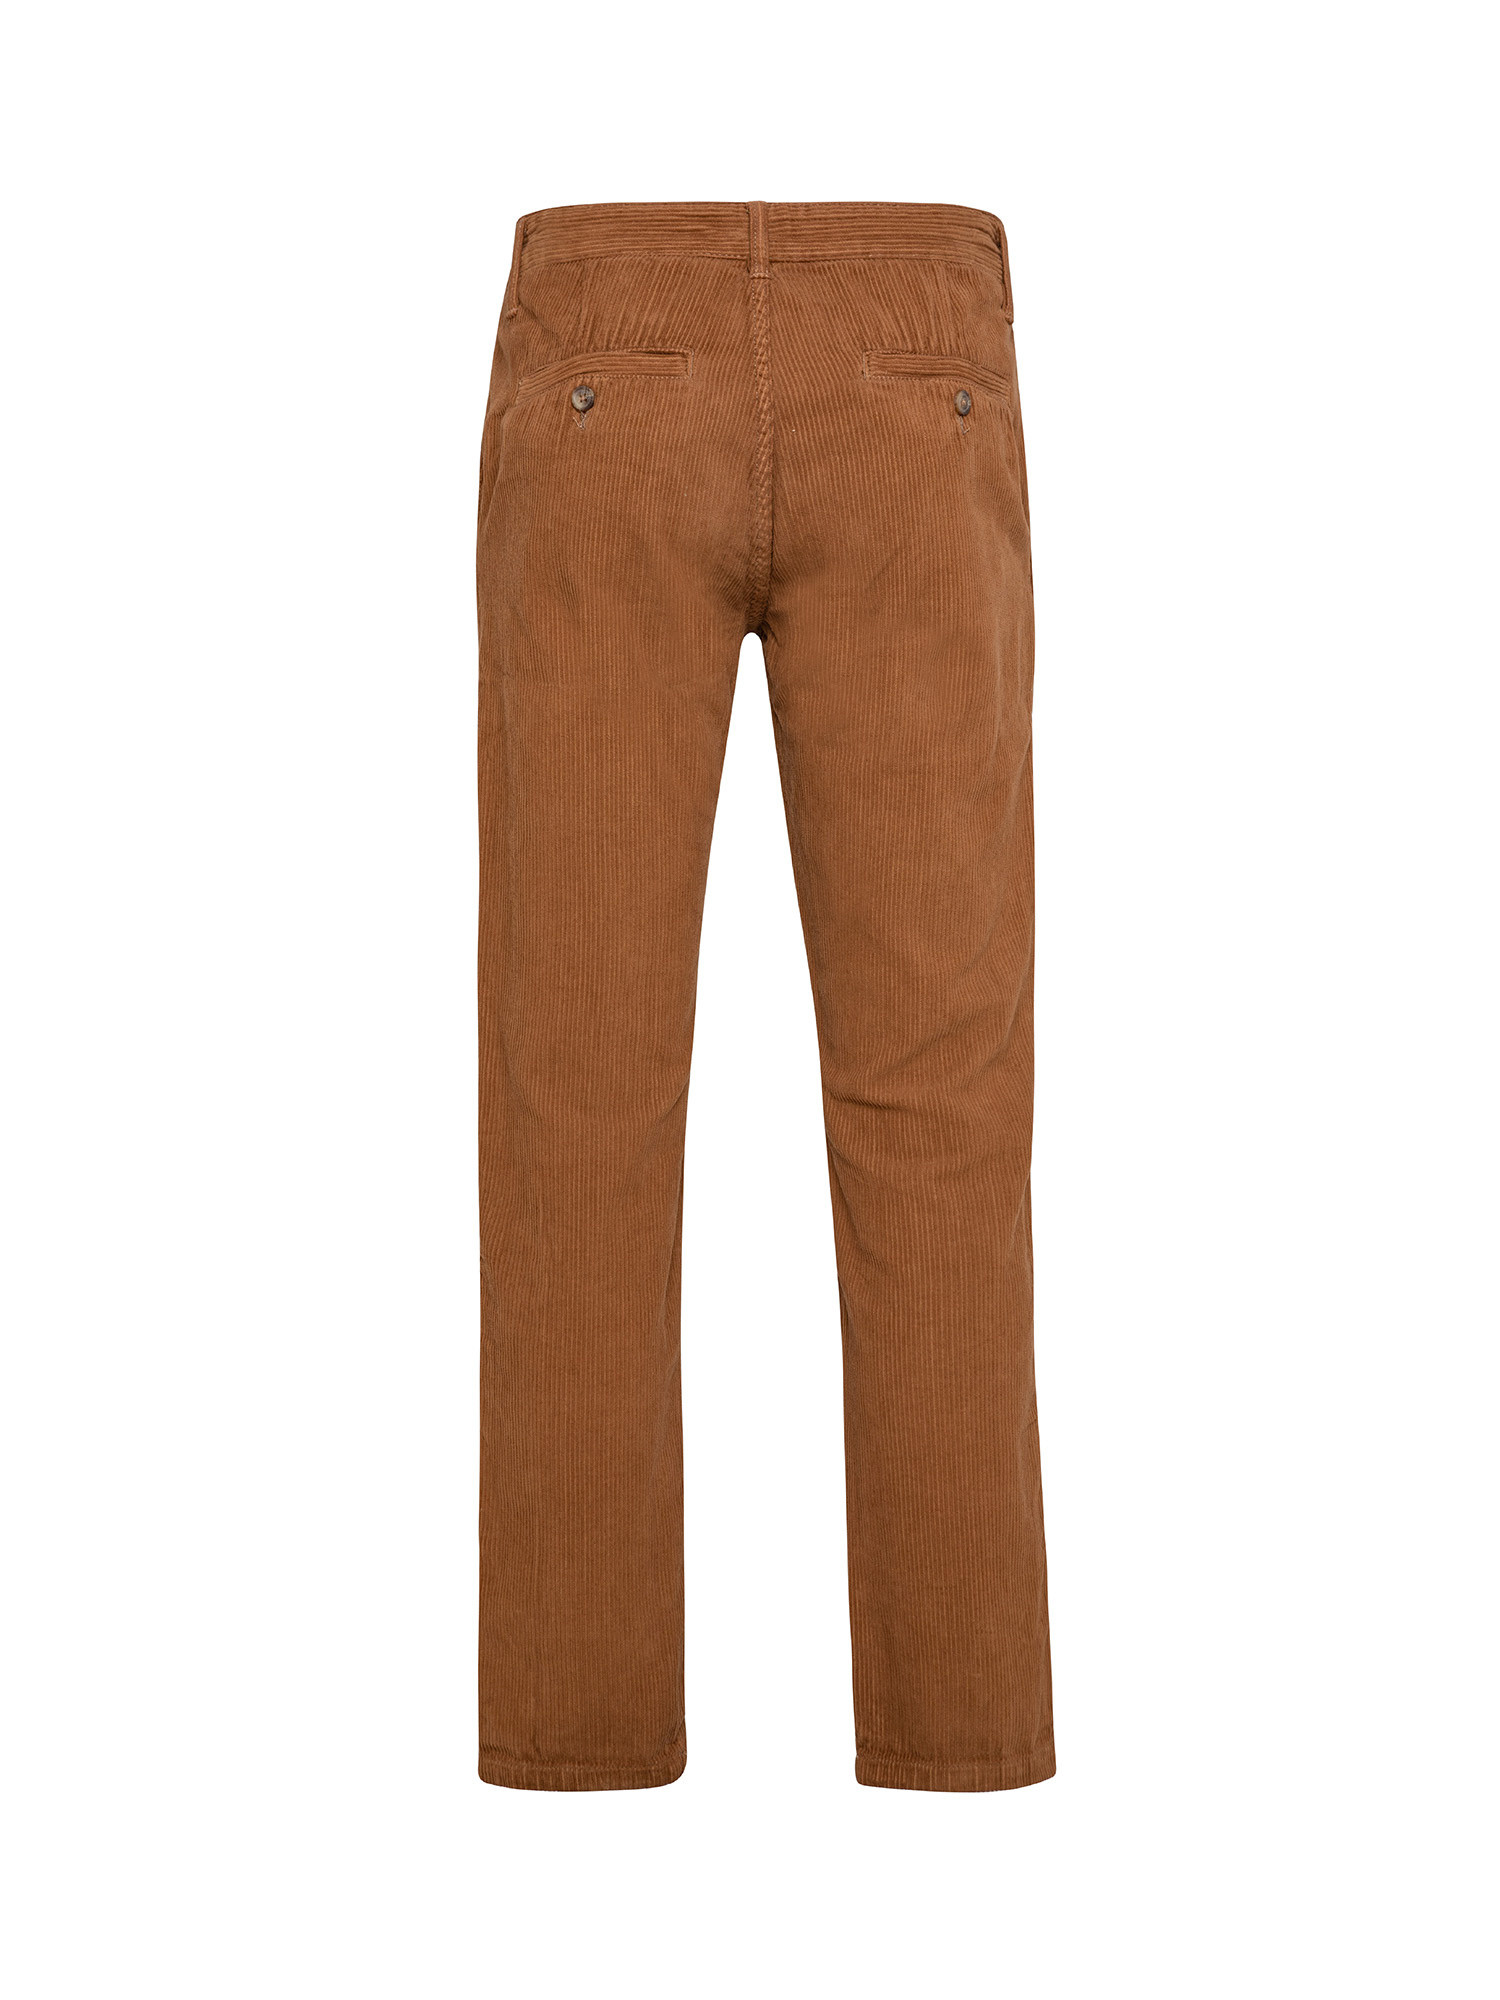 JCT - Pantalone chino in velluto, Marrone, large image number 1